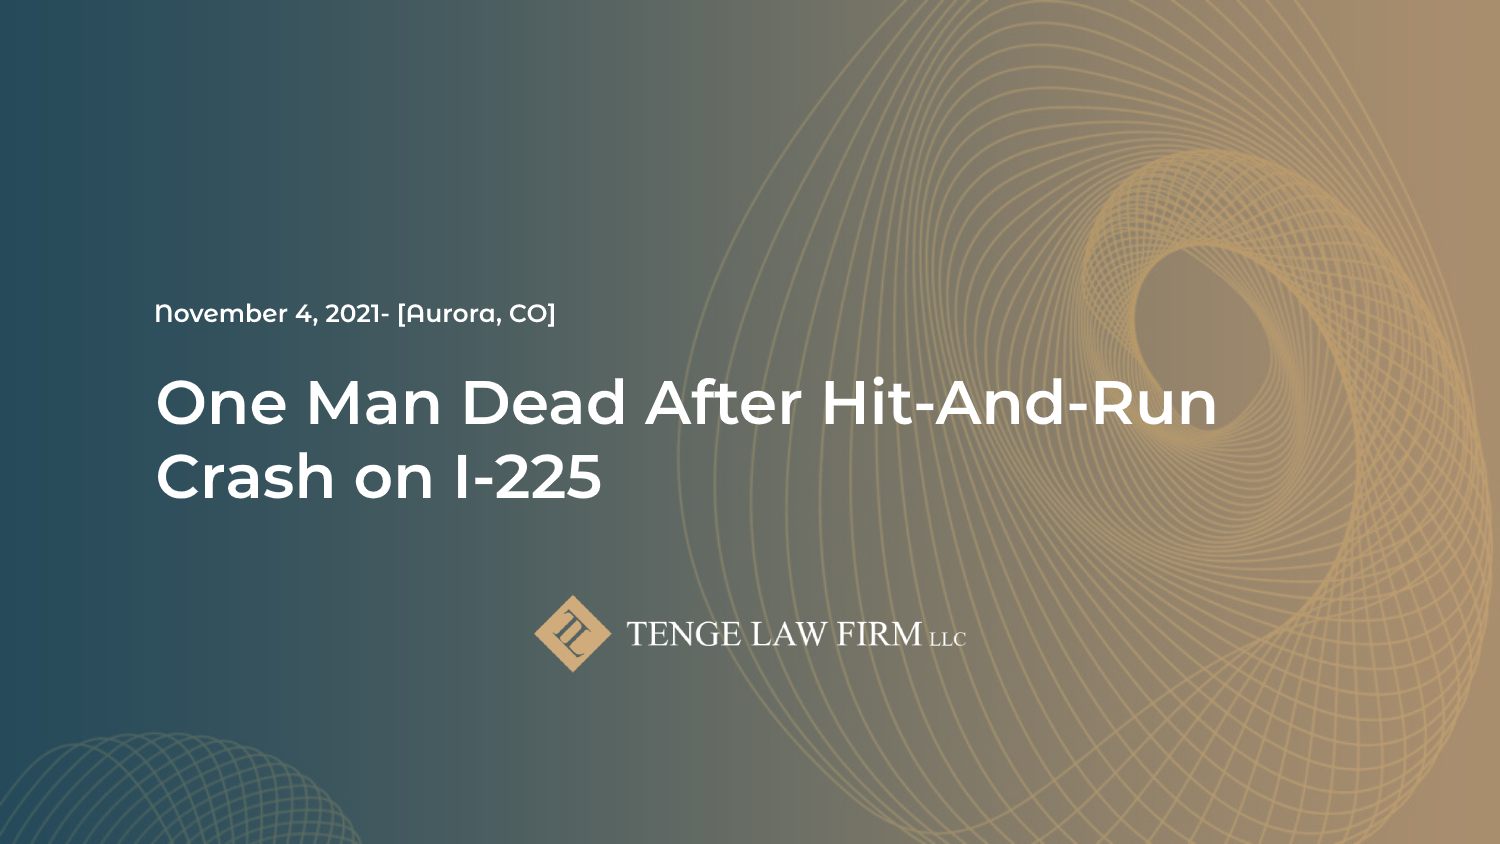 One Man Dead After Hit-And-Run Crash on I-225